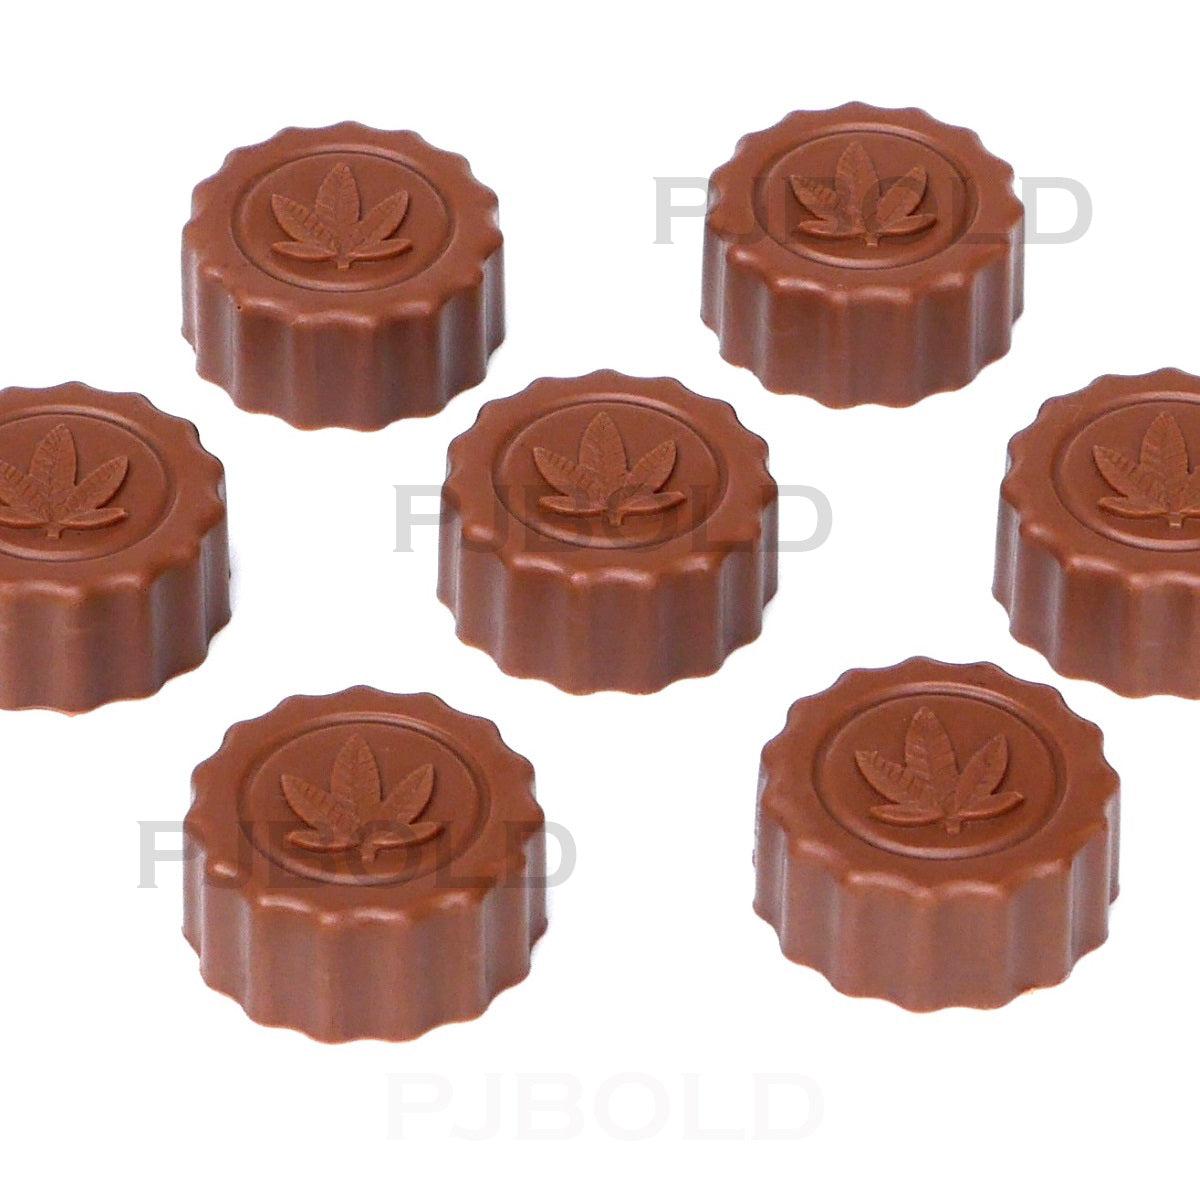 Pj Bold Leaf Chocolate Bar Silicone Candy Mold Trays, 2 Pack, Brown